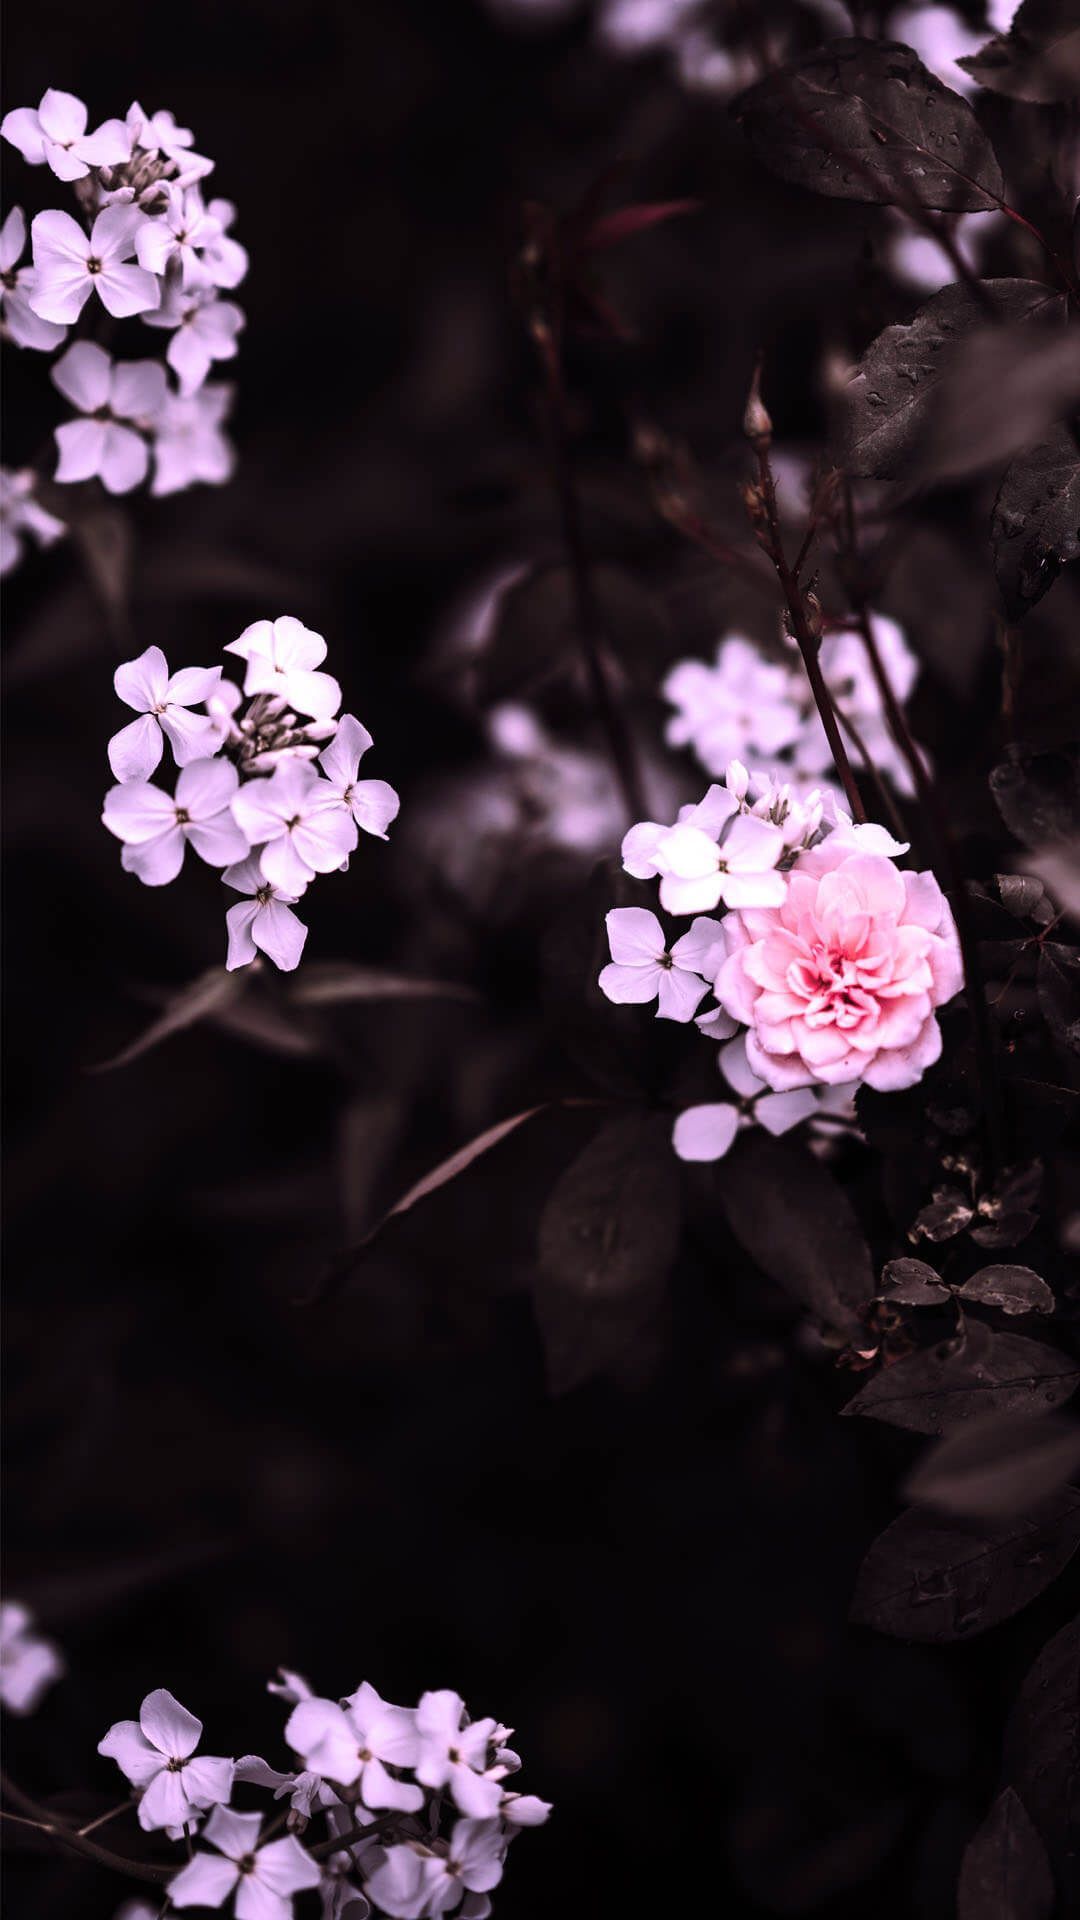 15 Incomparable aesthetic flower wallpaper You Can Download It Without ...